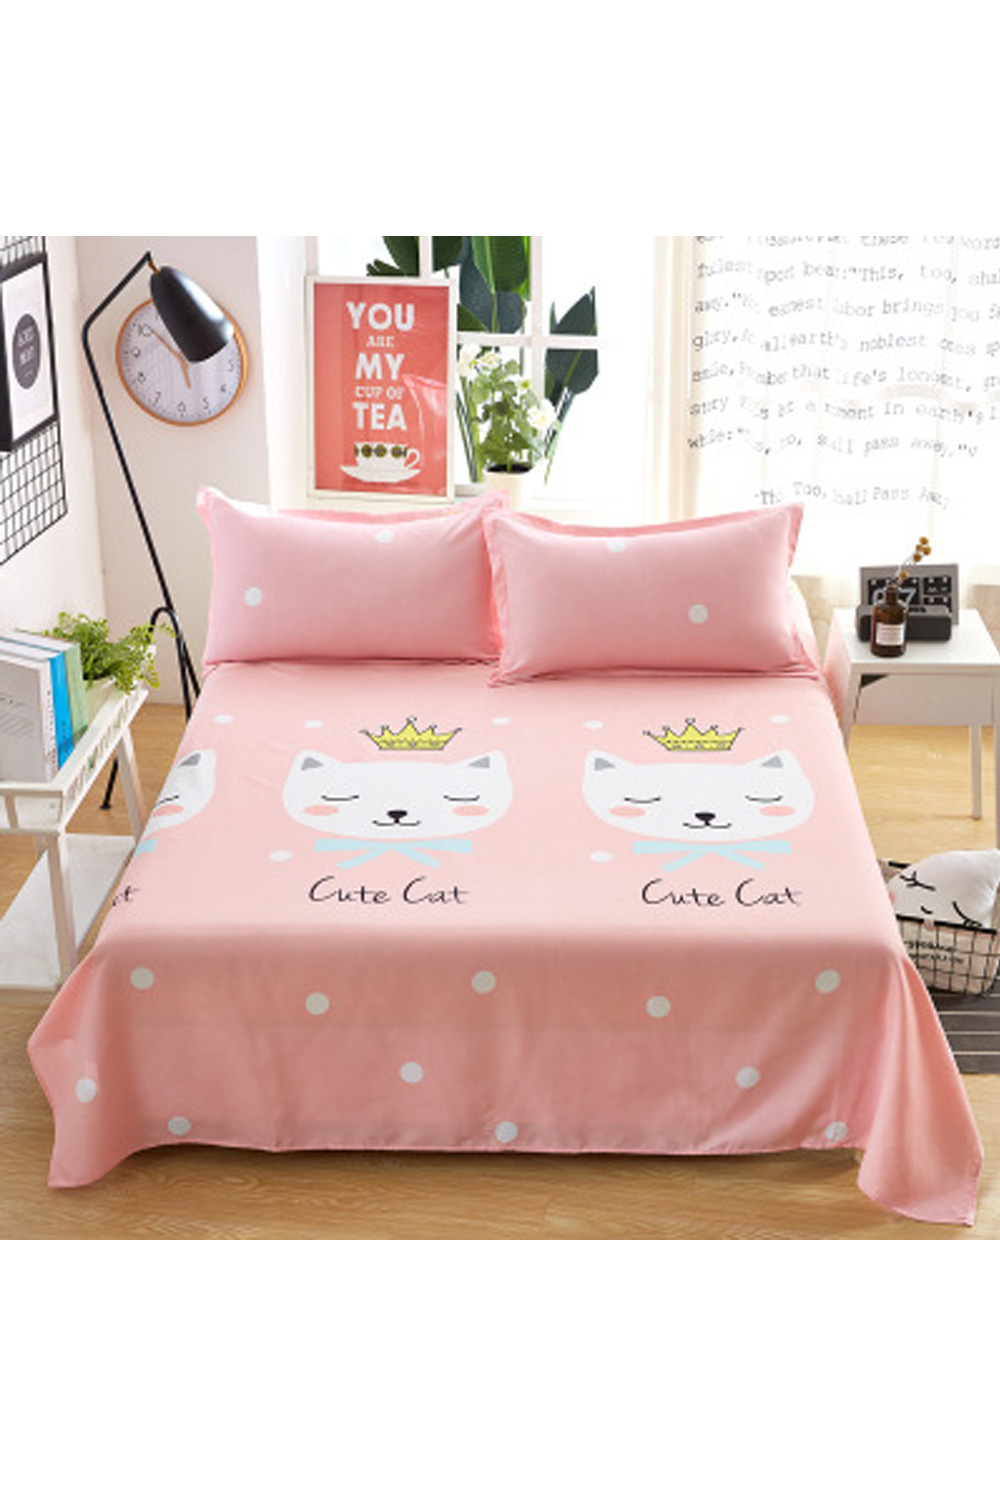 KettyMore Home Decor Cute Cartoon Printed Lovely Bed Sheet With Pillow  Covers